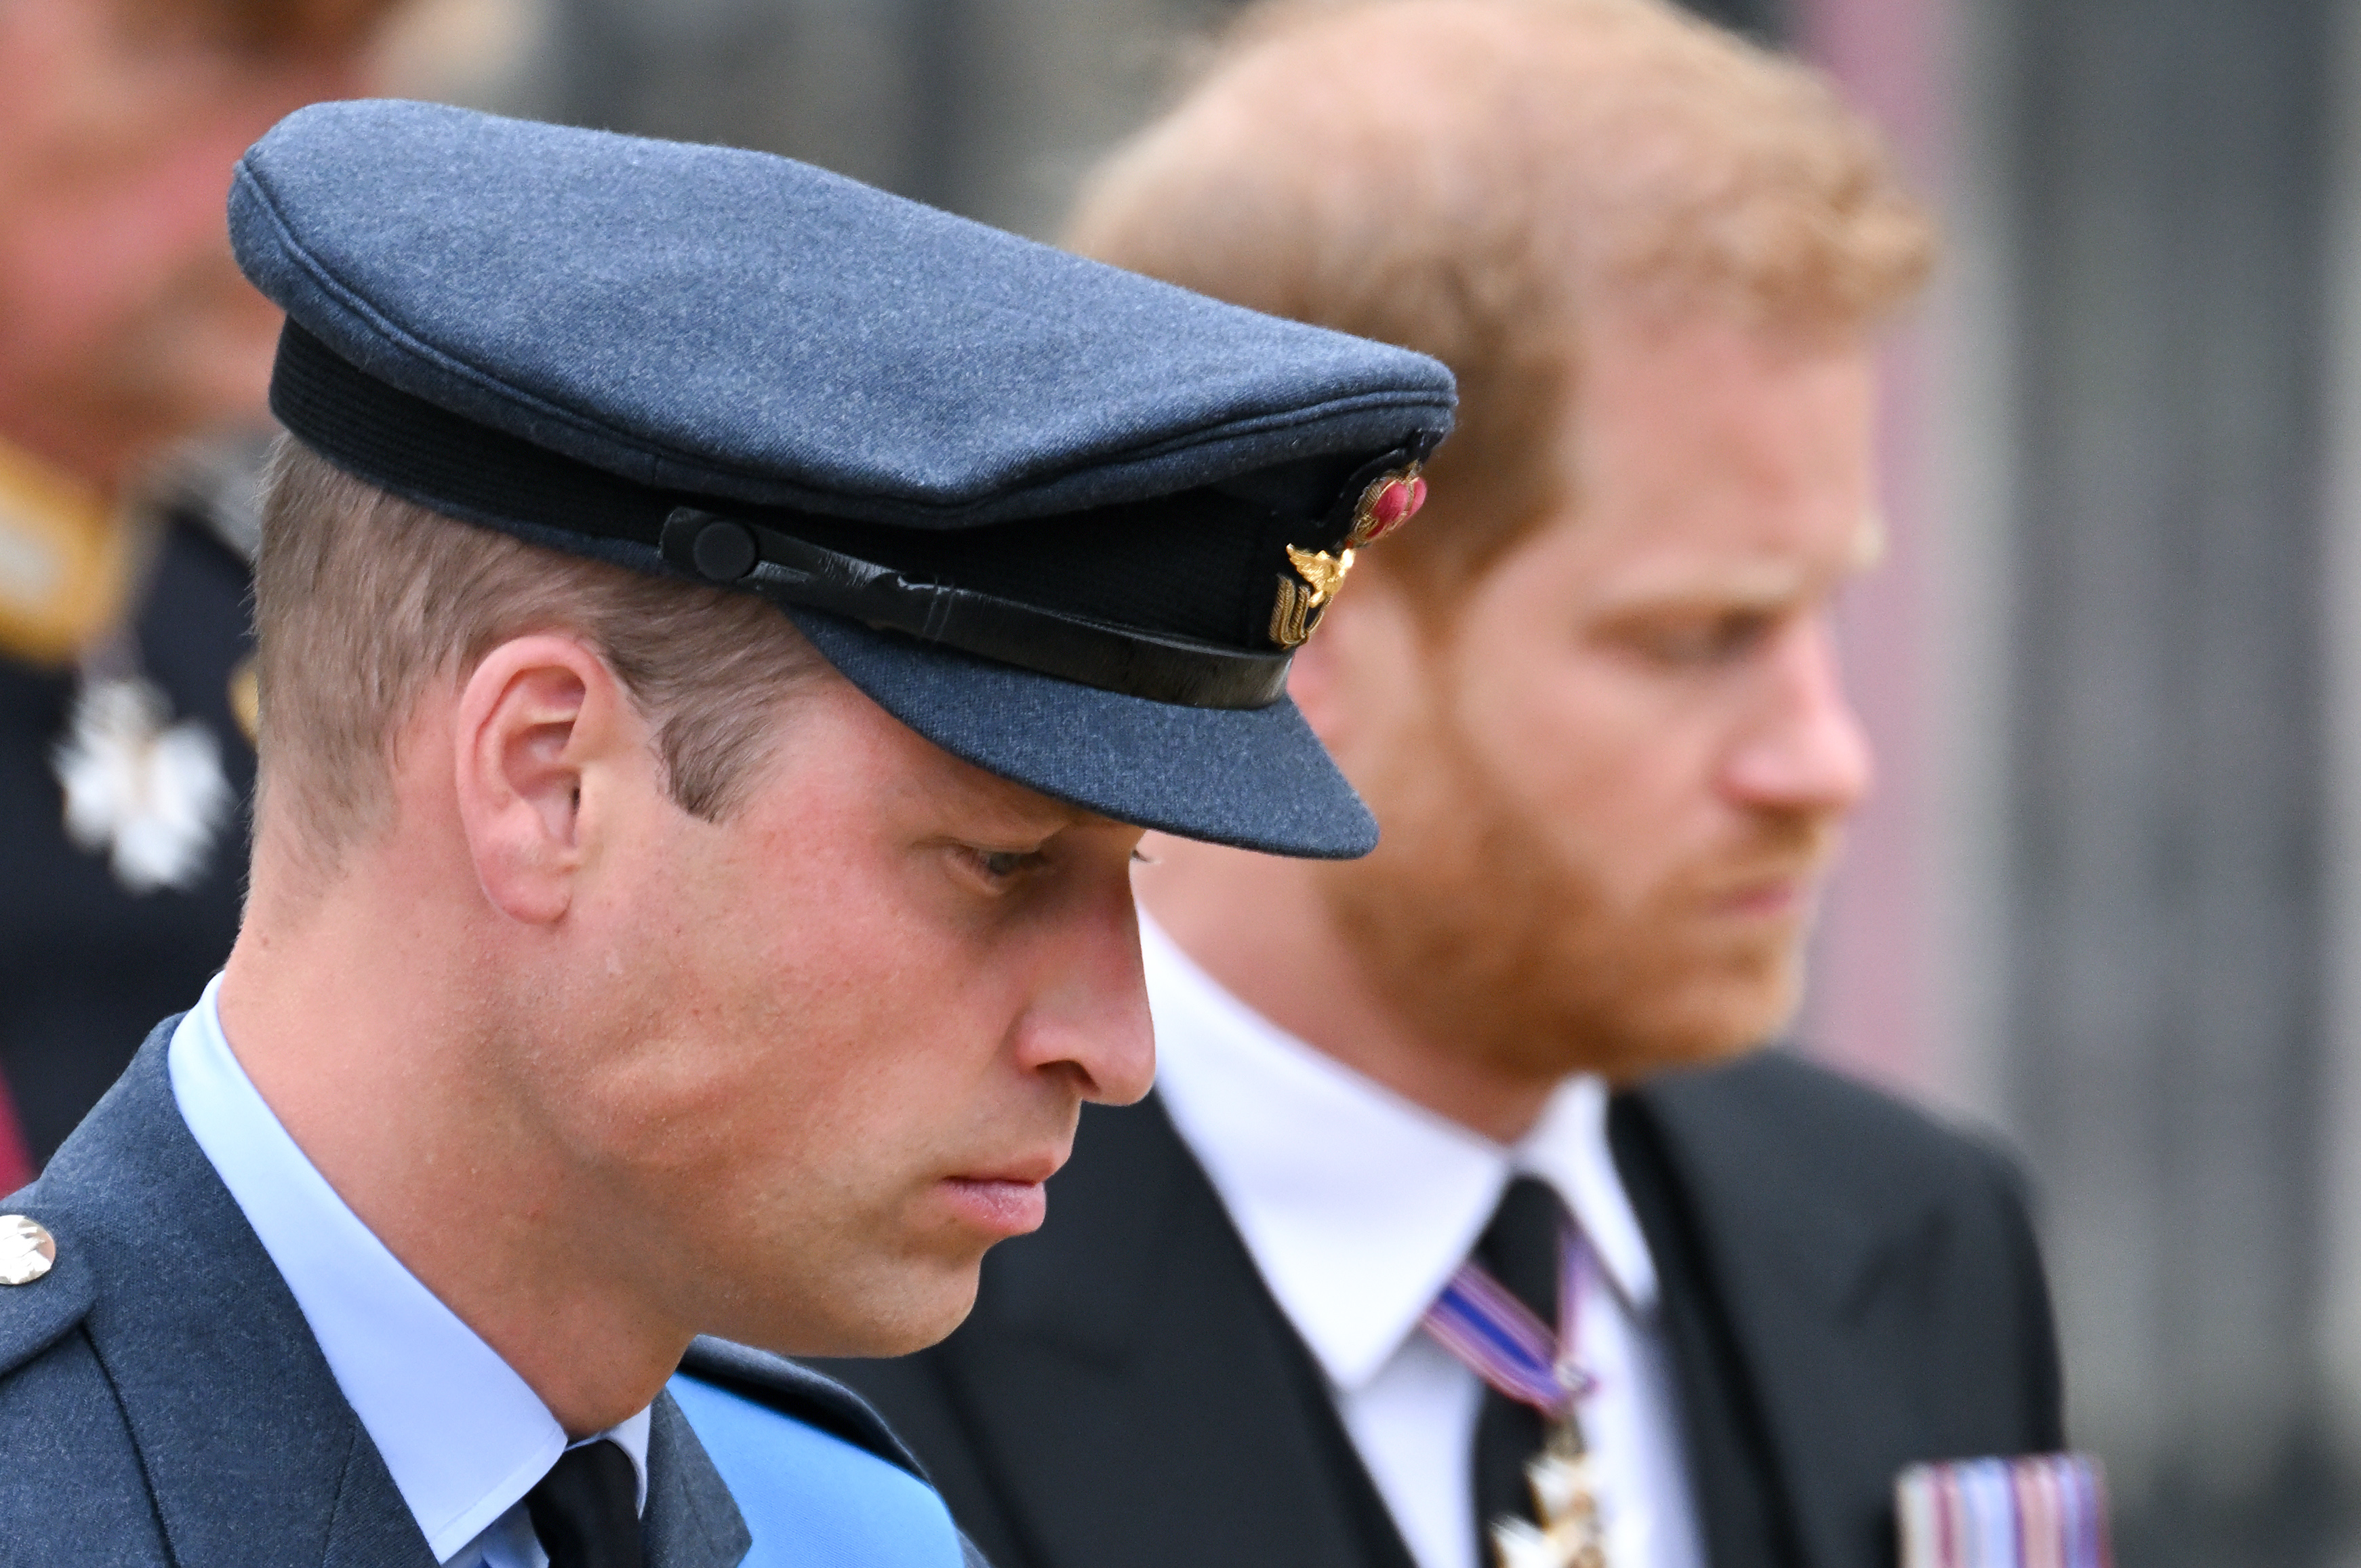 Prince William and Prince Harry during the State Funeral of Queen Elizabeth II at Westminster Abbey on September 19, 2022 in London, England | Source: Getty Images